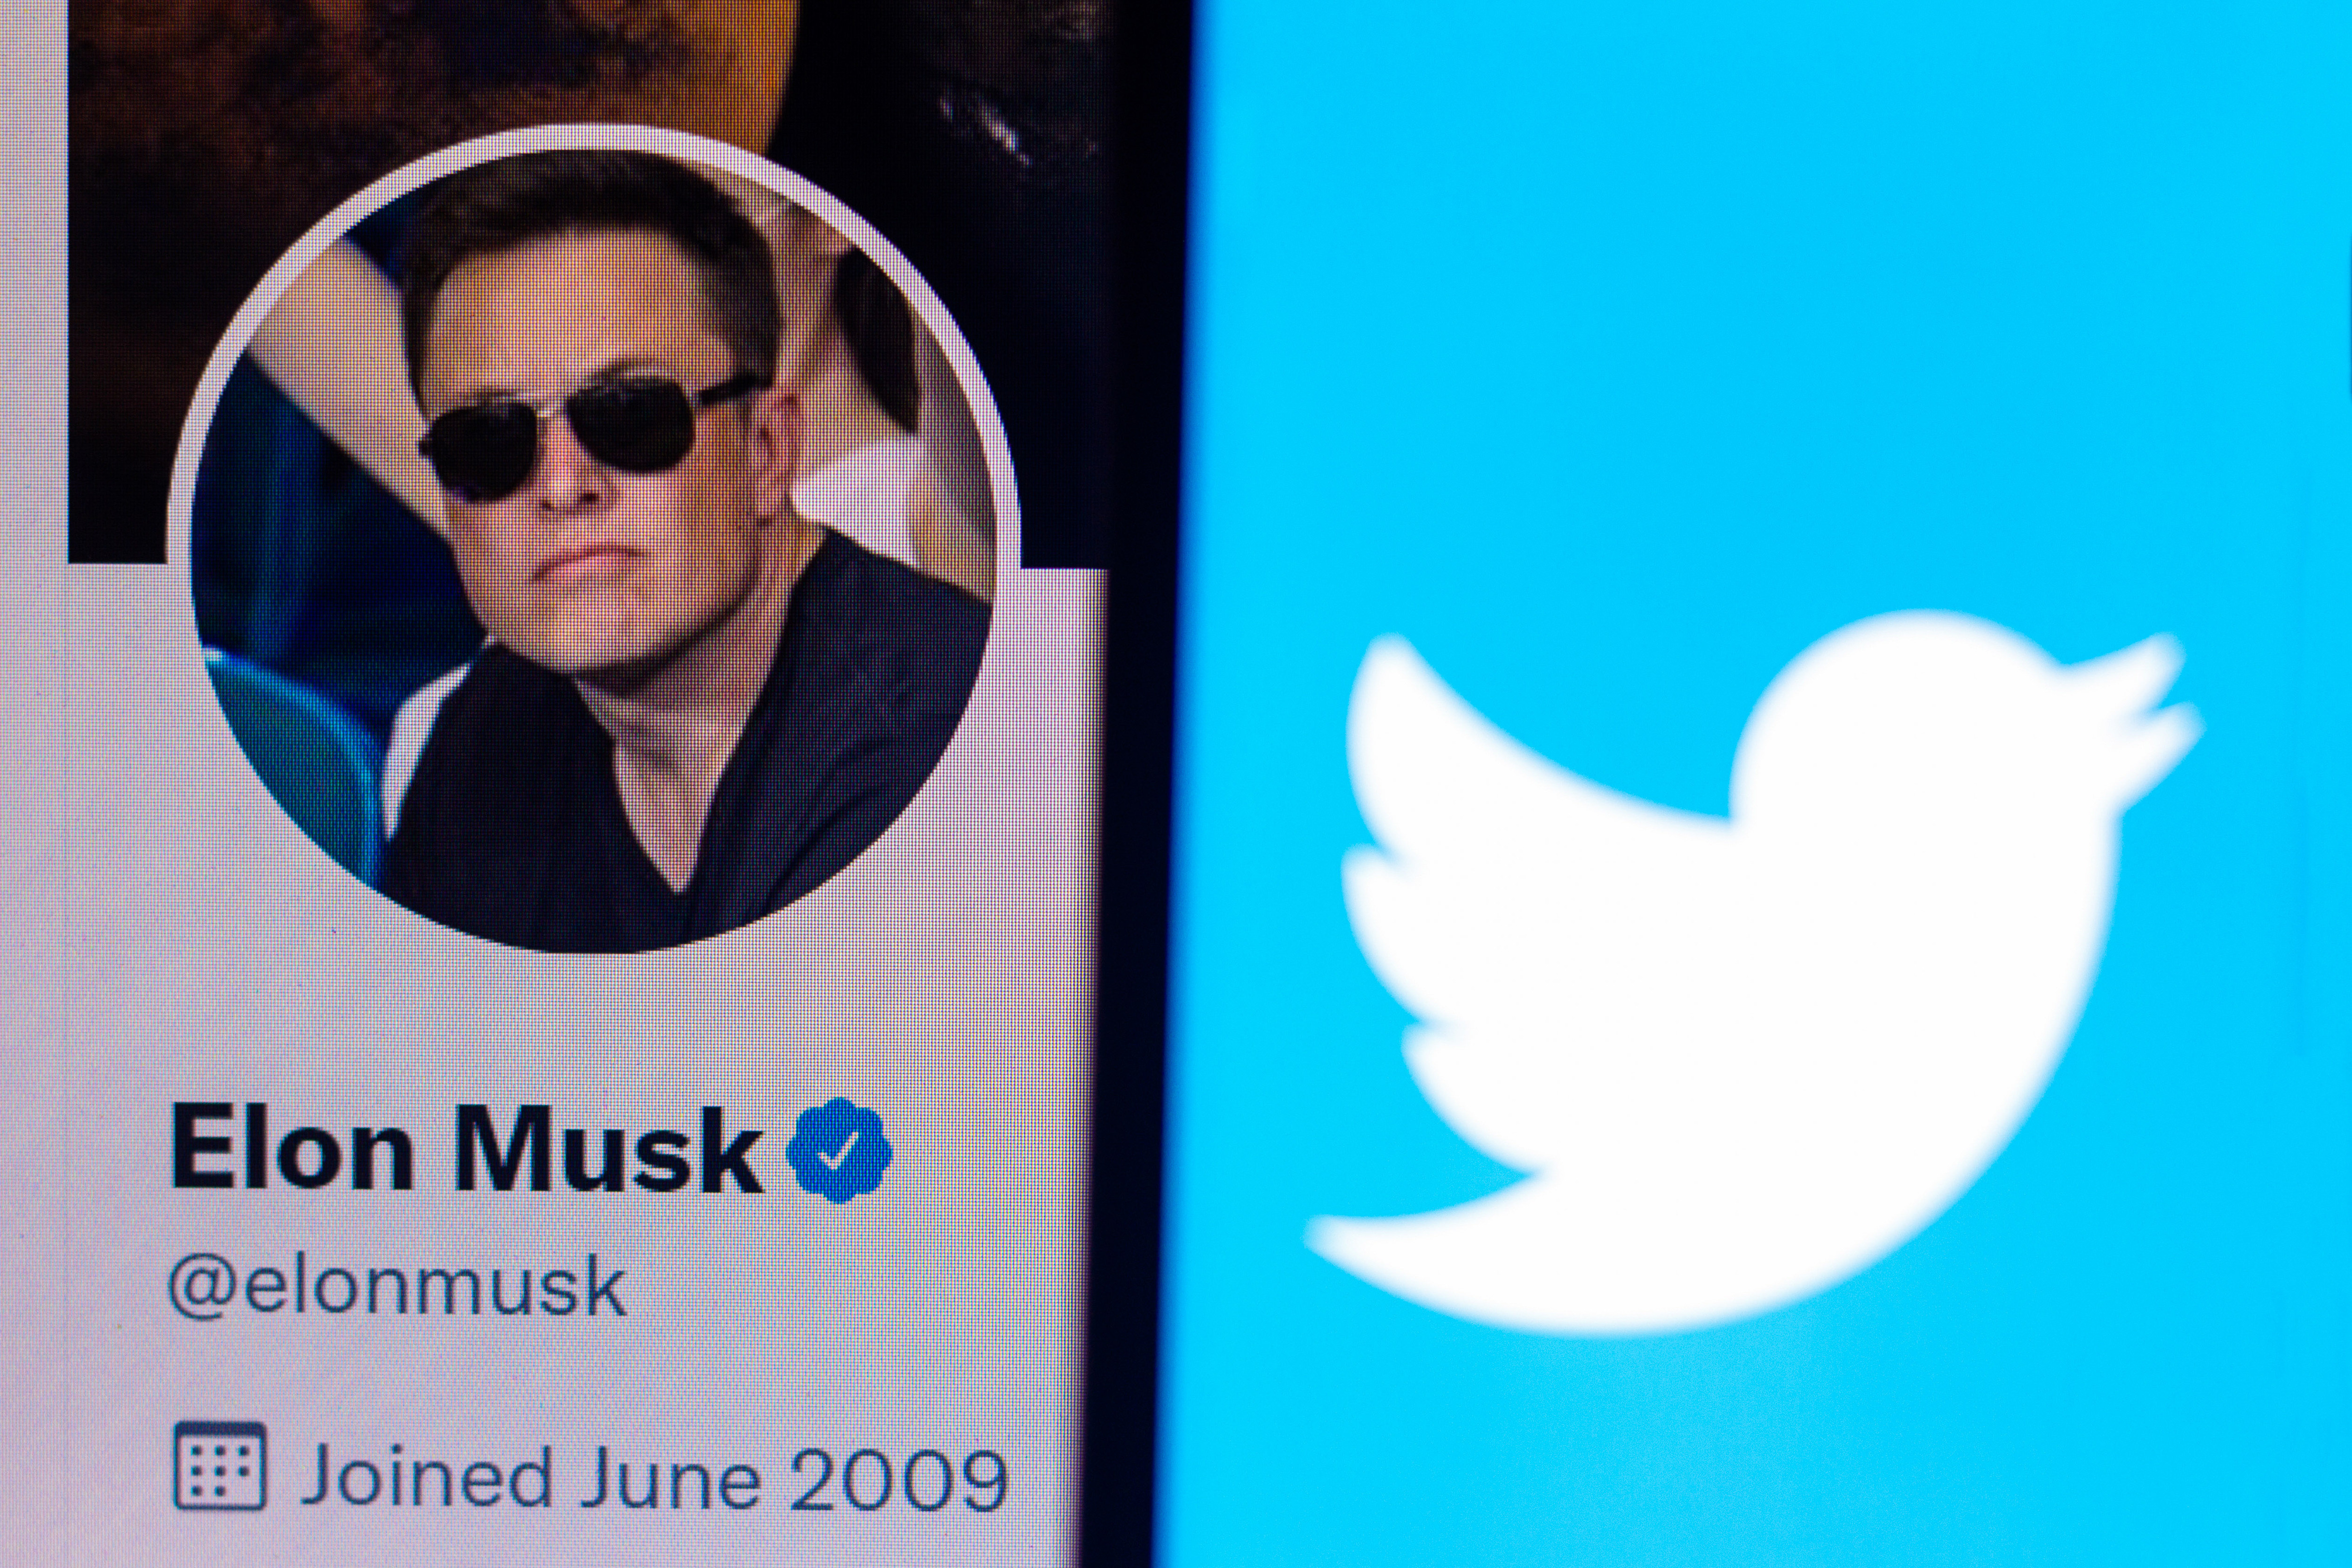 In this photo illustration, the Twitter logo is displayed alongside Elon Musk’s profile picture on his Twitter page.